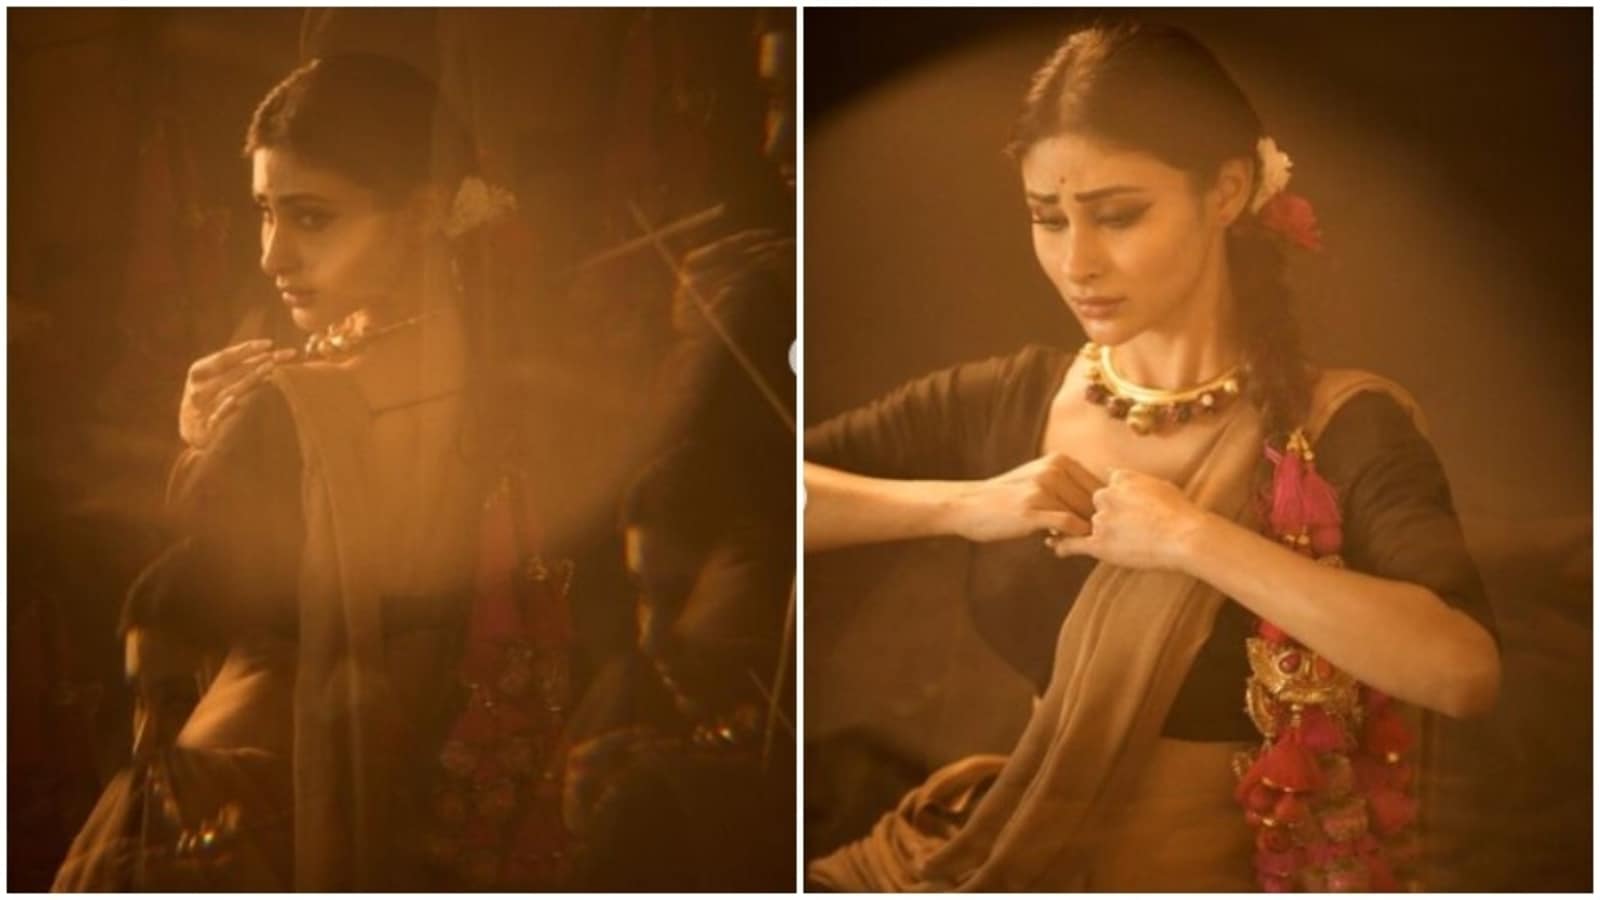 Mouni Roy decks up in saree for new photoshoot, makes fans drool